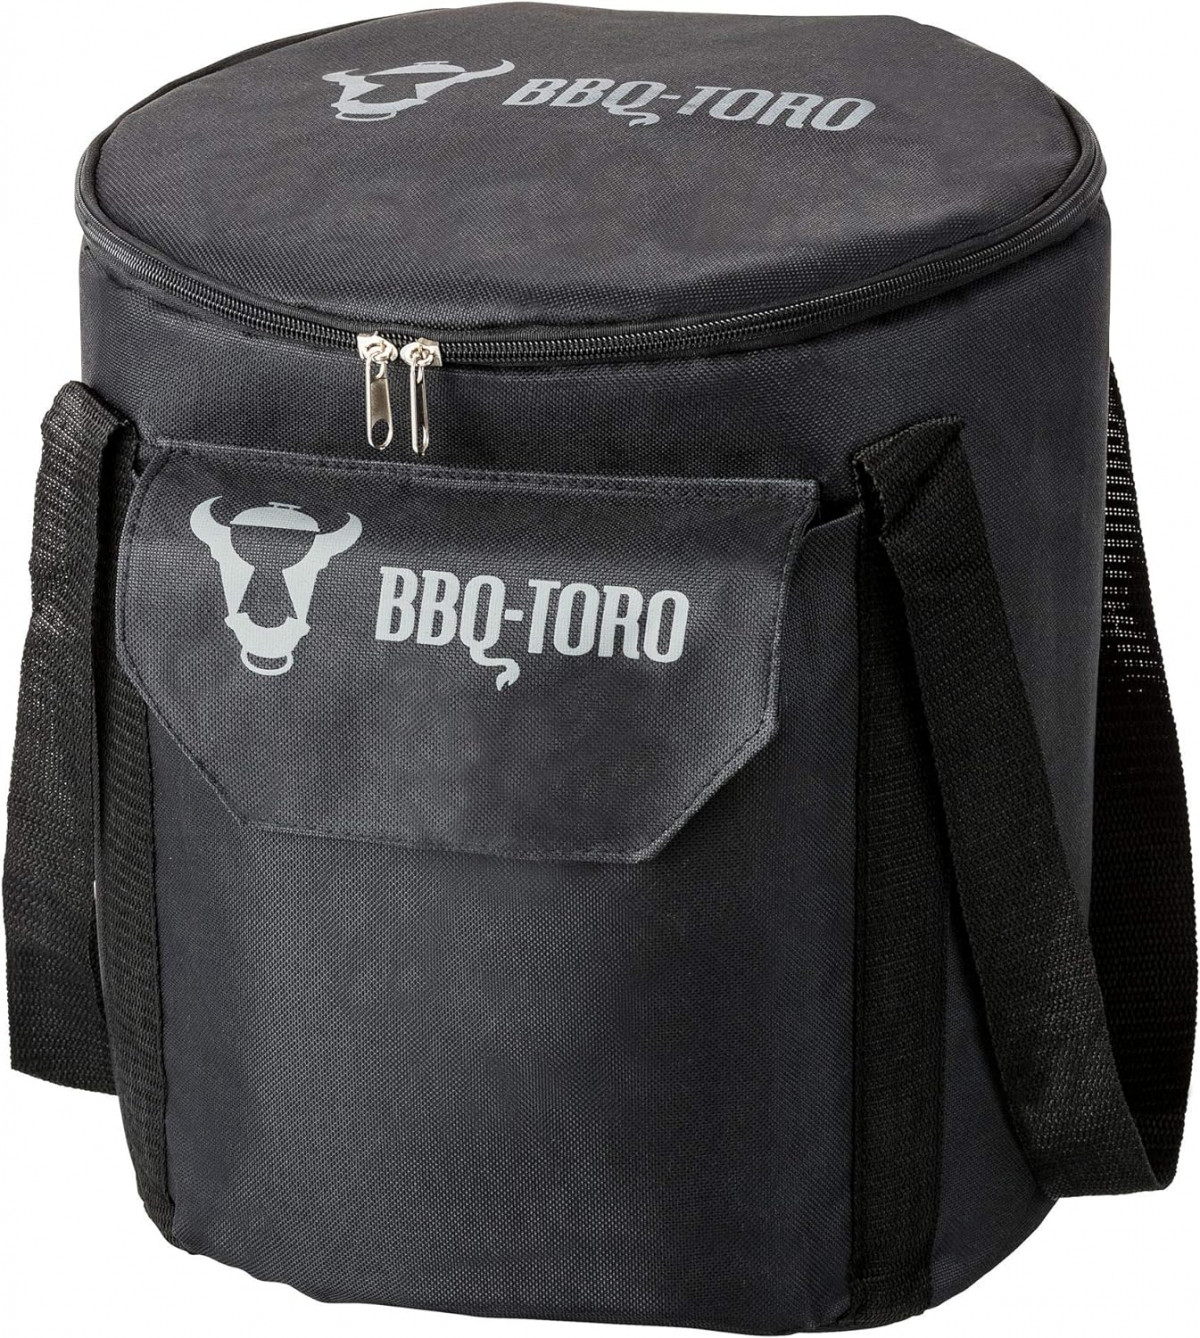 BBQ-Toro Carrying Bag / Delivery Bag for Cauldron equipment -  www.